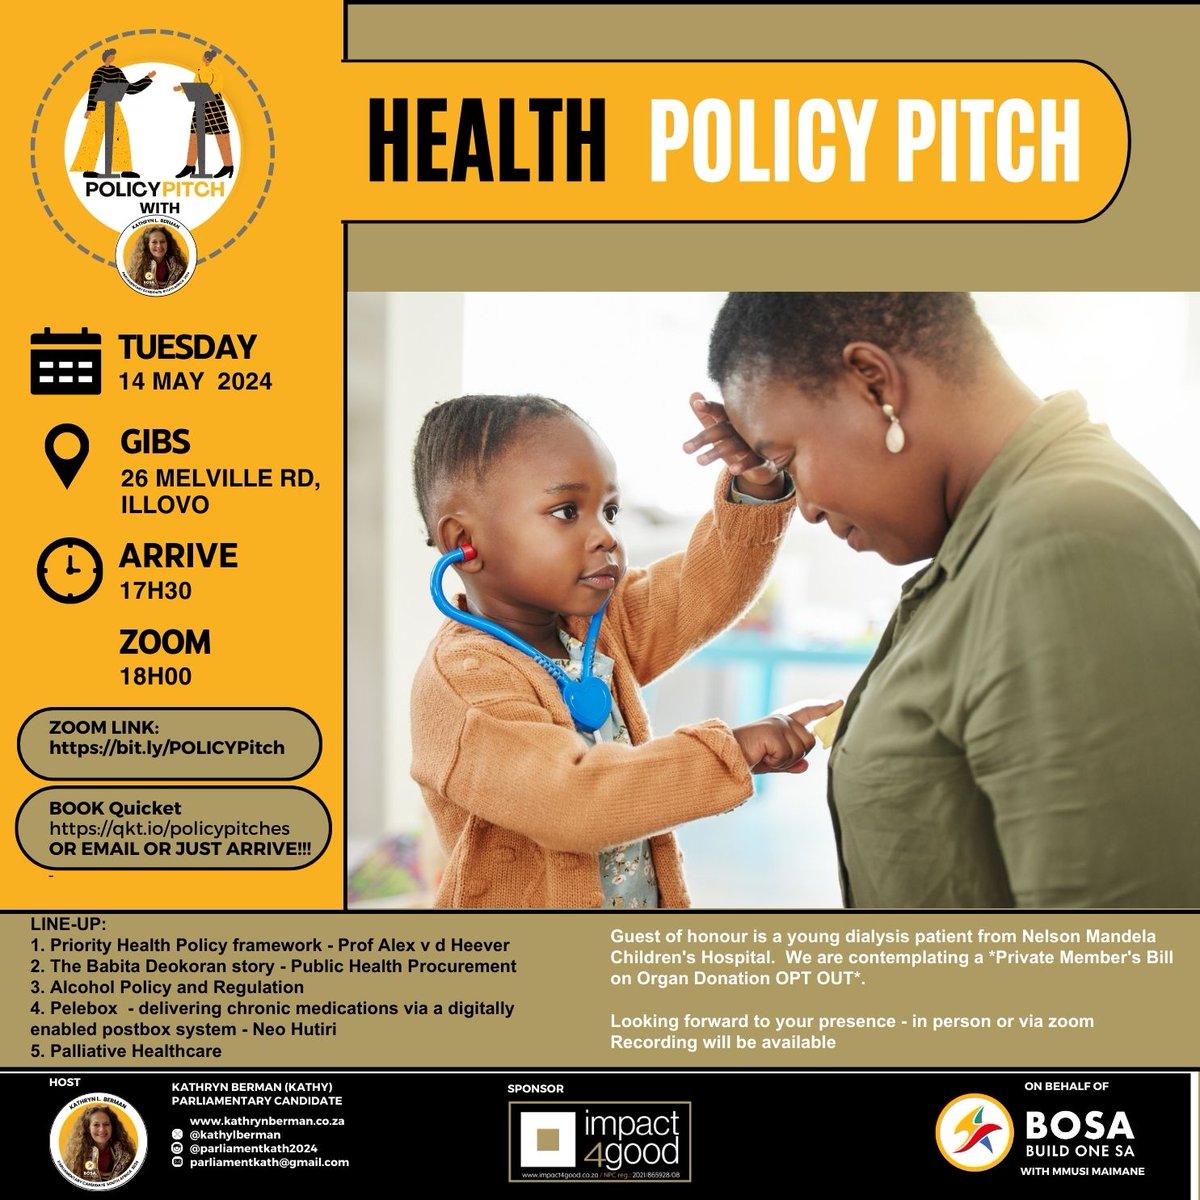 The #NHIBill features: @GIBS_SA TONIGHT Tuesday 14 May 2024 17h30 for 18h00 An inclusive POLICY PITCH focusing on the HEALTH SECTOR Line-up includes: 1. HEALTH POLICY FRAMEWORK - Prof Alex van den Heever 2. BABITA DEOKORAN - Public Health Procurement 3. ALCOHOL - Policy and…